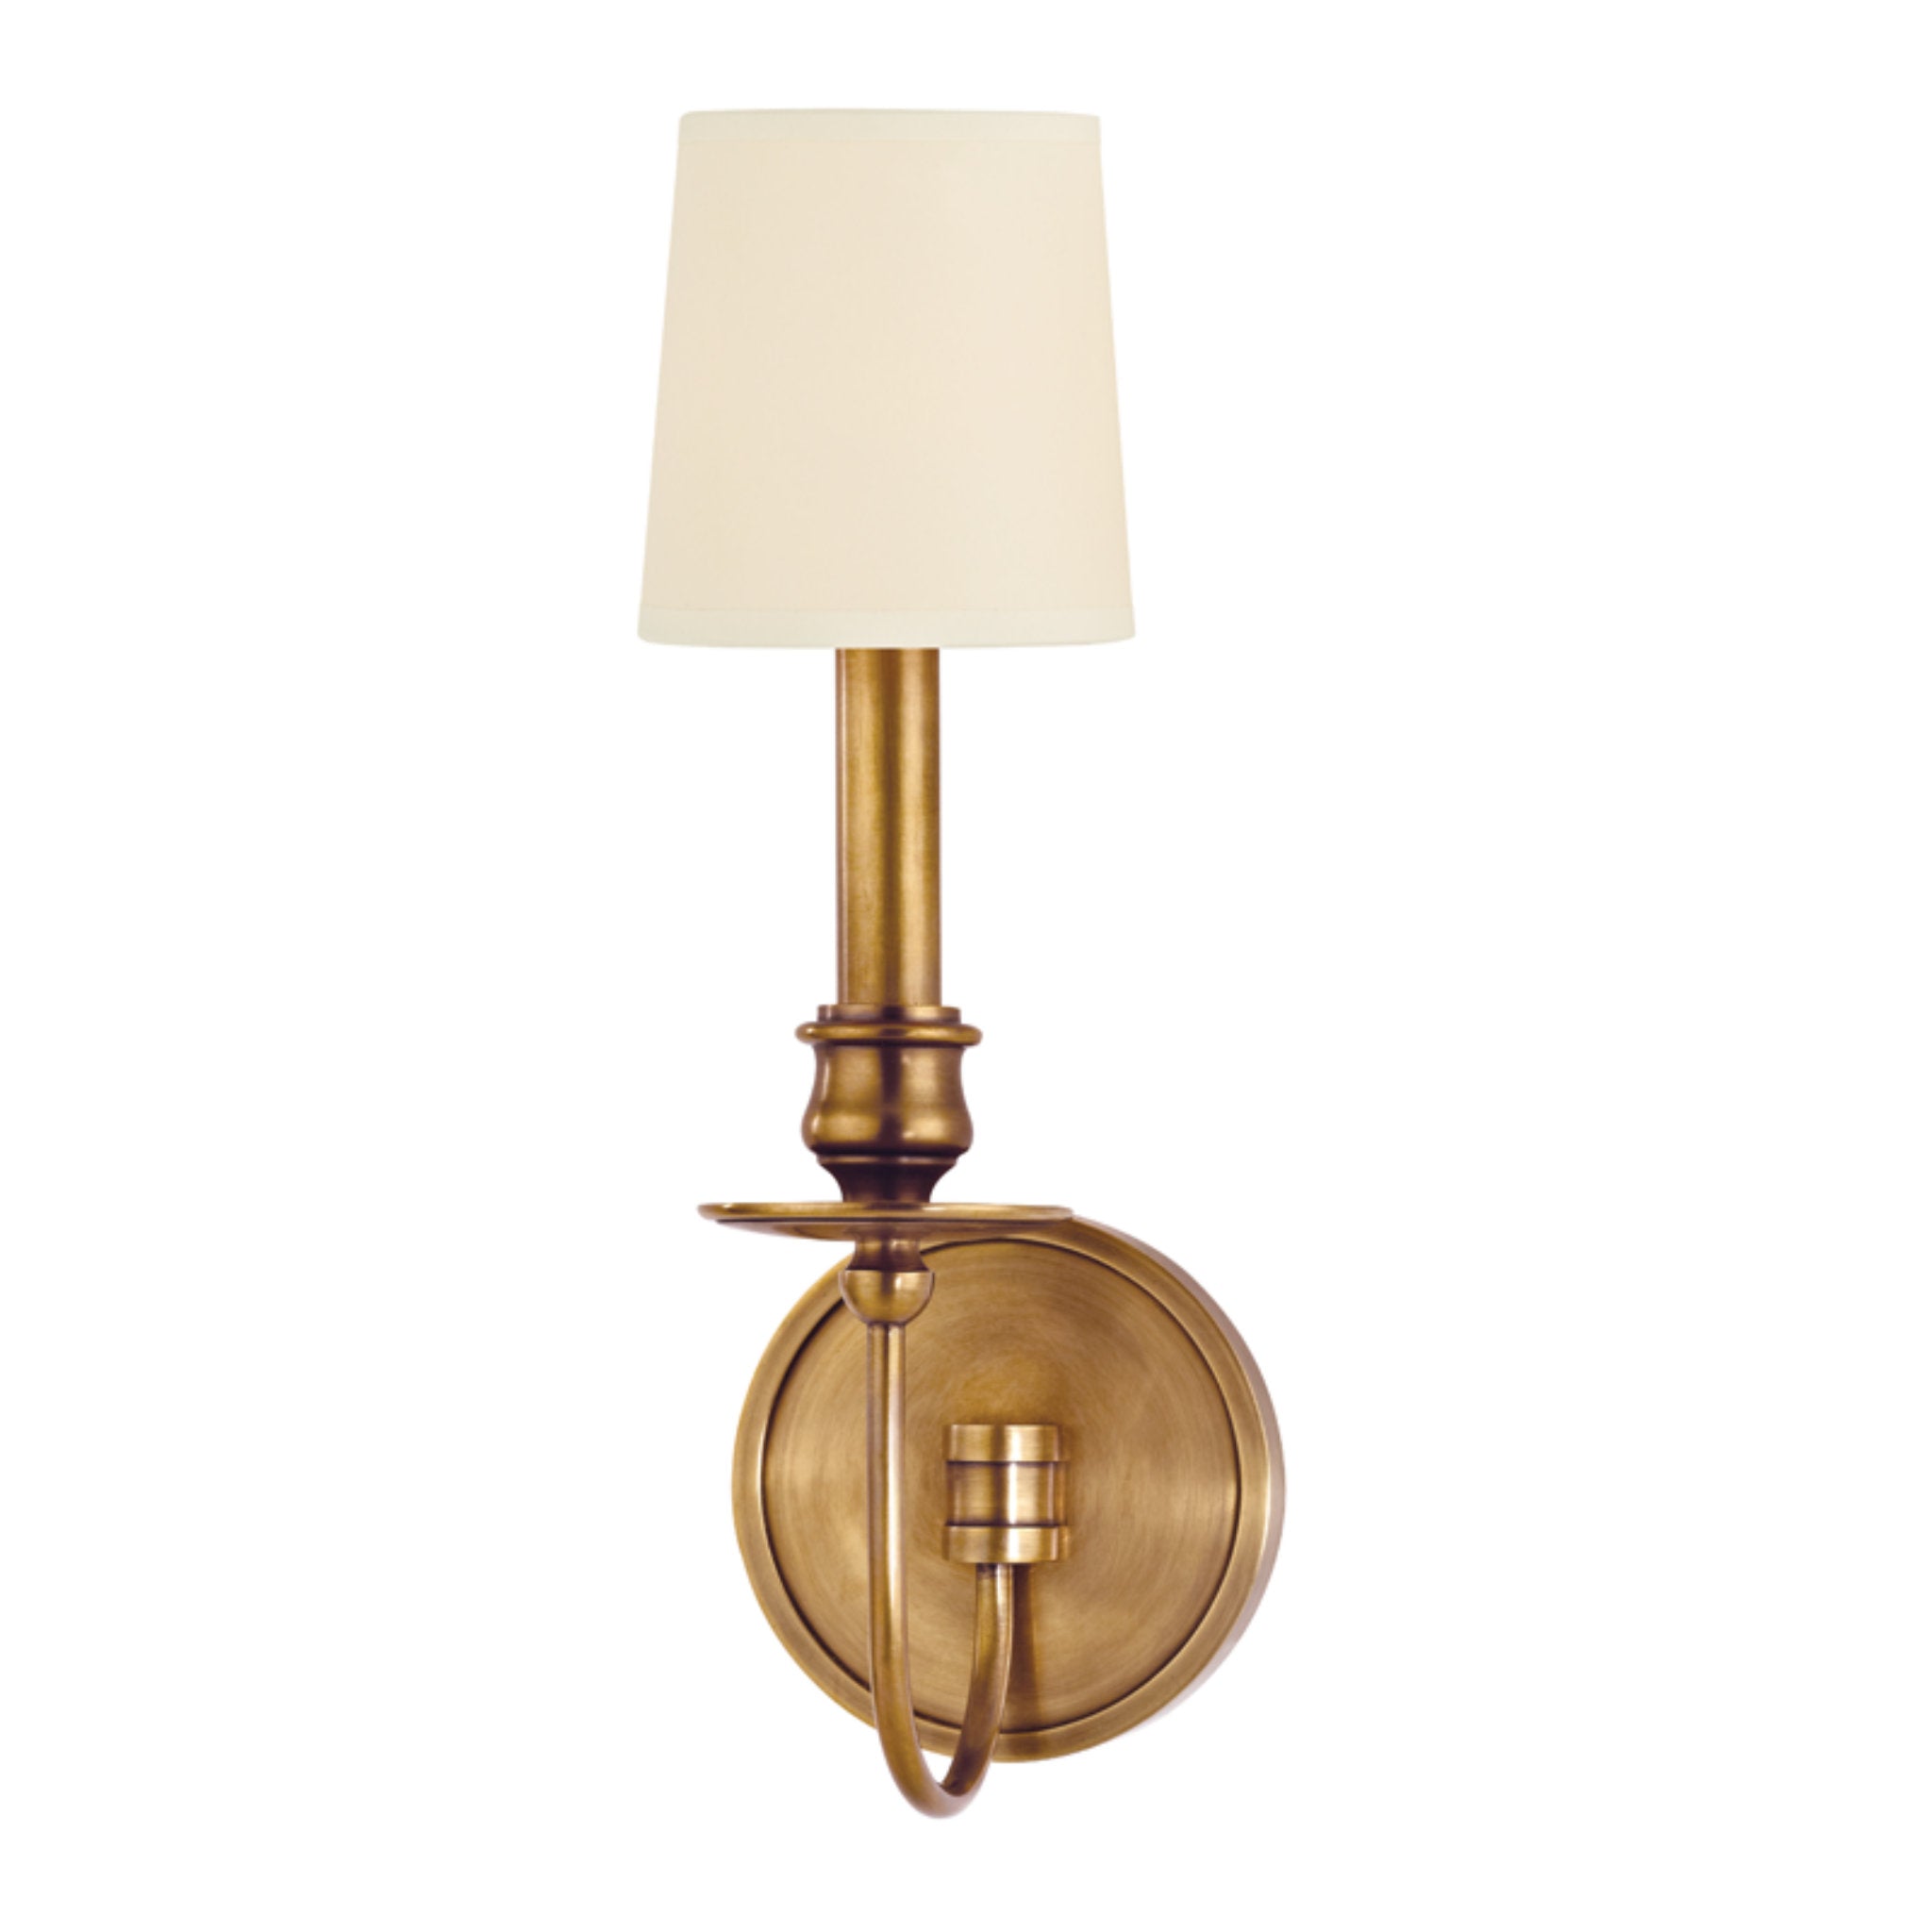 Cohasset 1 Light Wall Sconce in Aged Brass